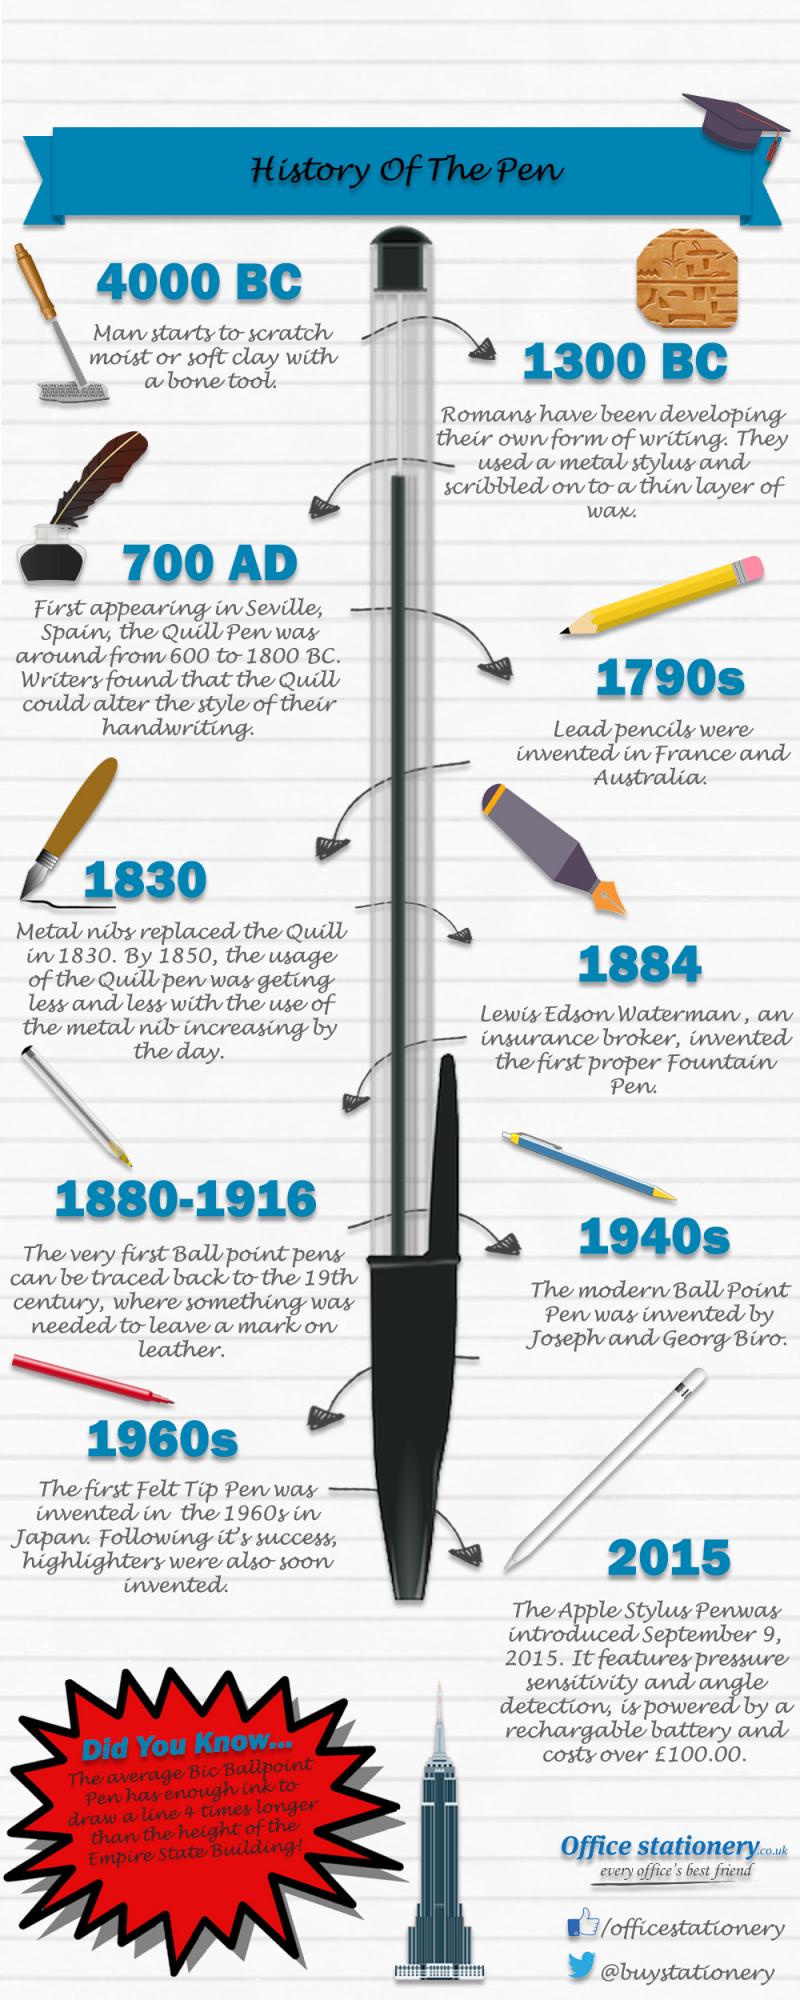 Did You Know Ink Pens Were Invented Over 5,000 Years Ago?